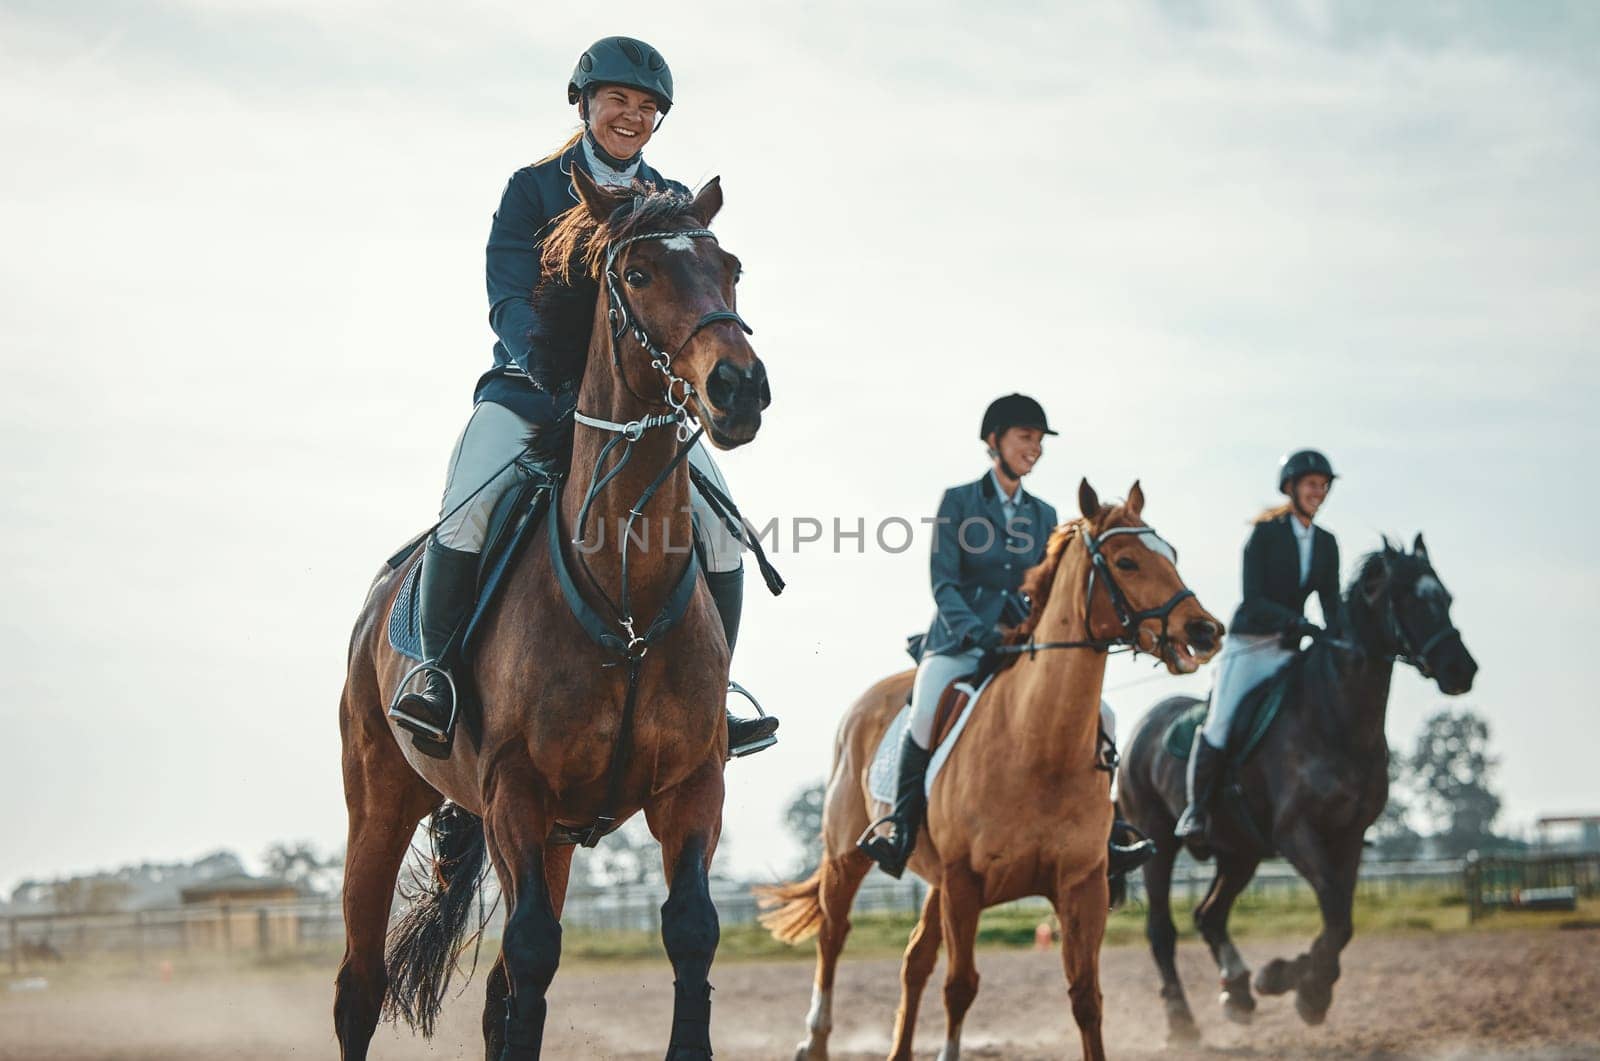 Equestrian, horse riding and sport, women in countryside outdoor with rider or jockey, recreation and speed. Animal, sports and fitness with athlete, group and competition with healthy lifestyle.